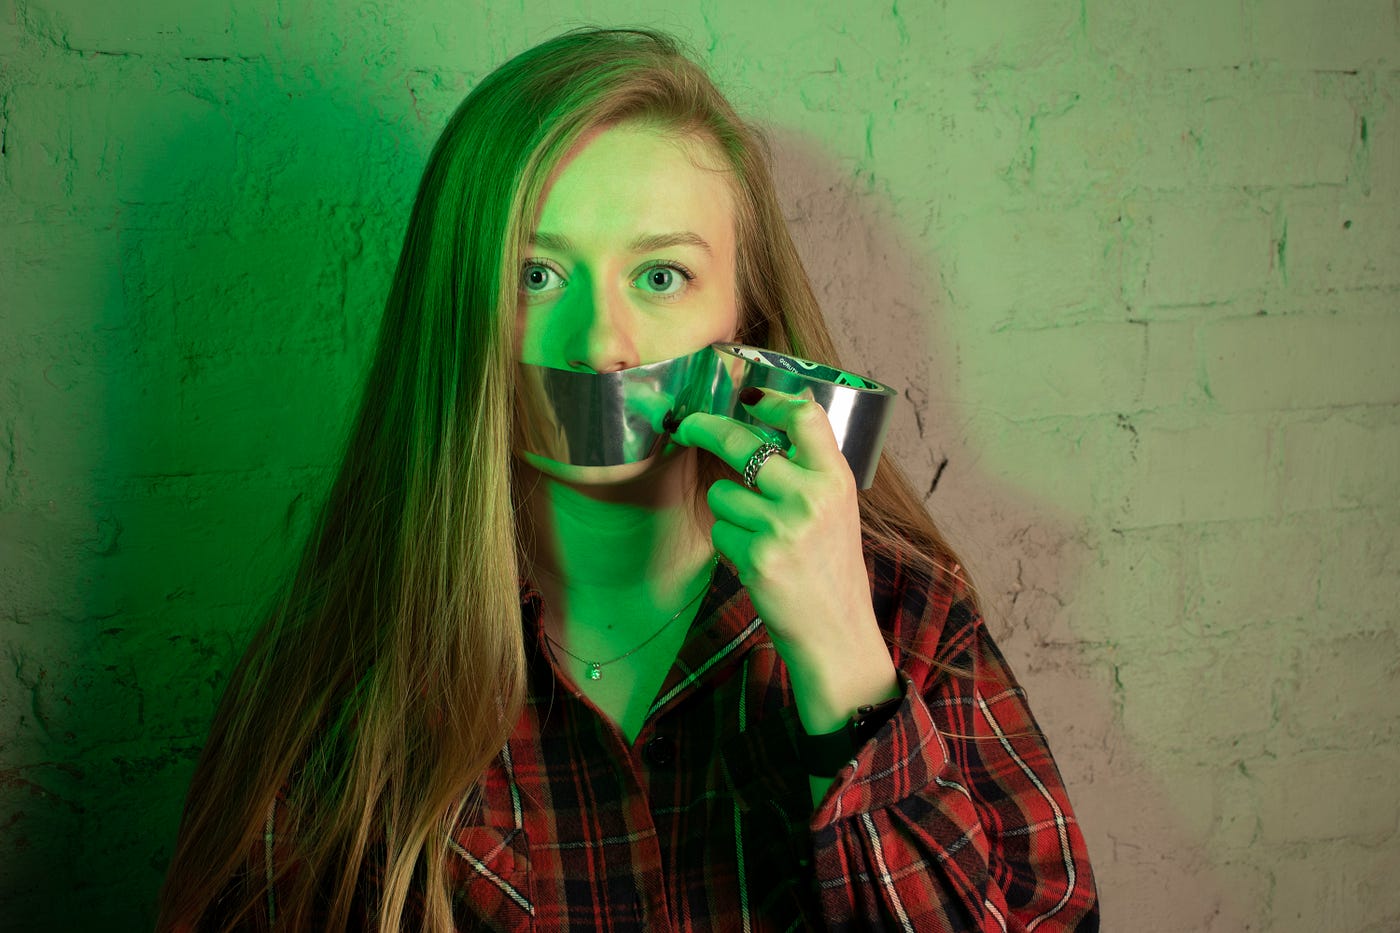 A girl takes duct tape off of her mouth.